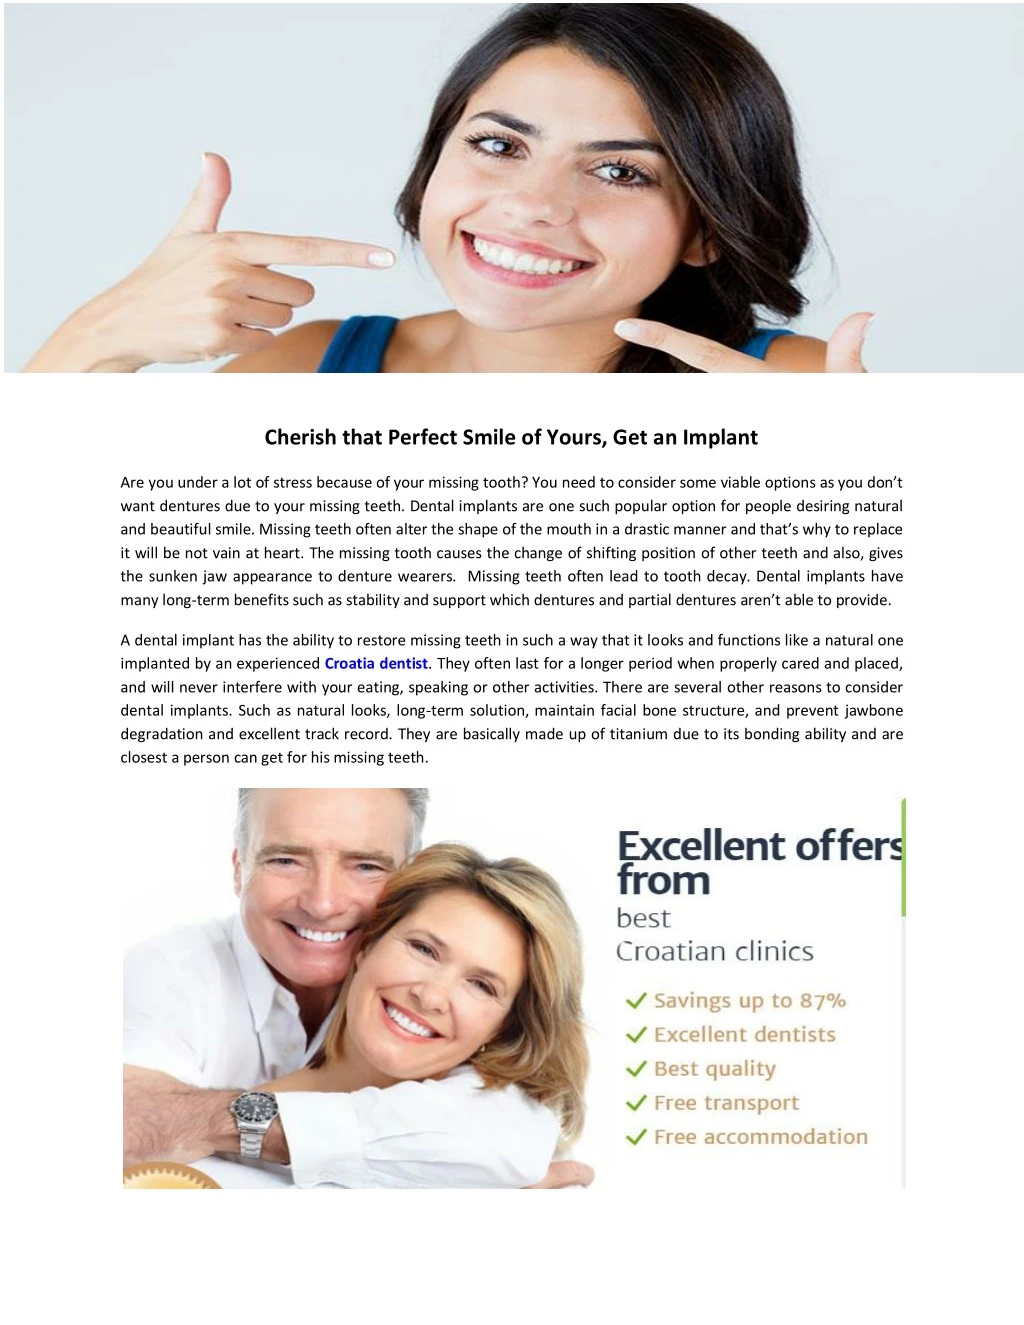 cherish that perfect smile of yours get an implant